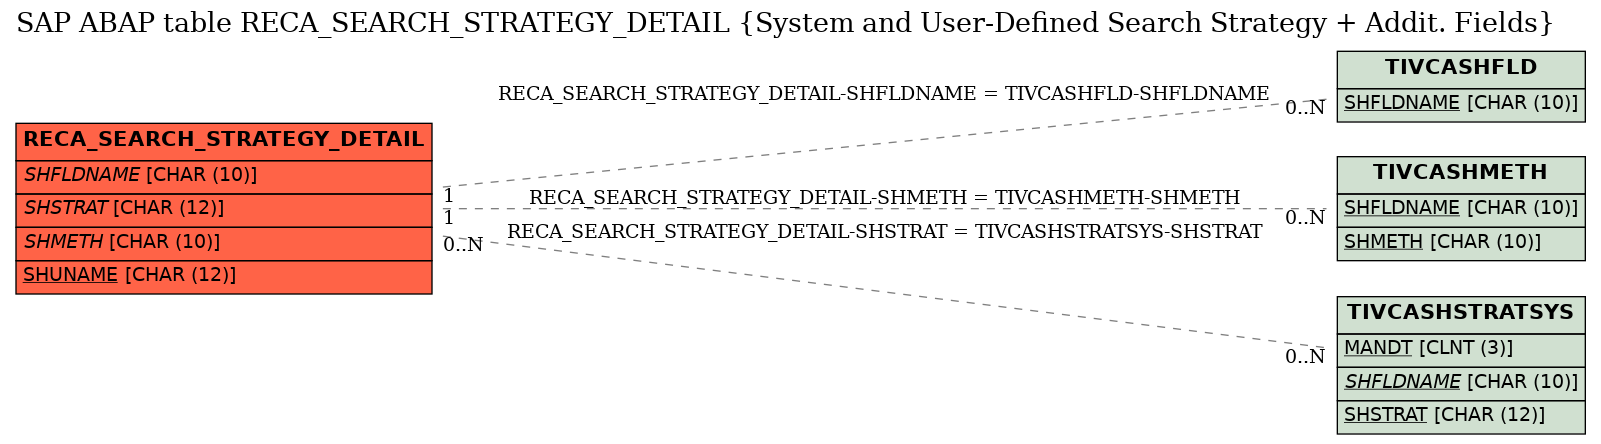 E-R Diagram for table RECA_SEARCH_STRATEGY_DETAIL (System and User-Defined Search Strategy + Addit. Fields)